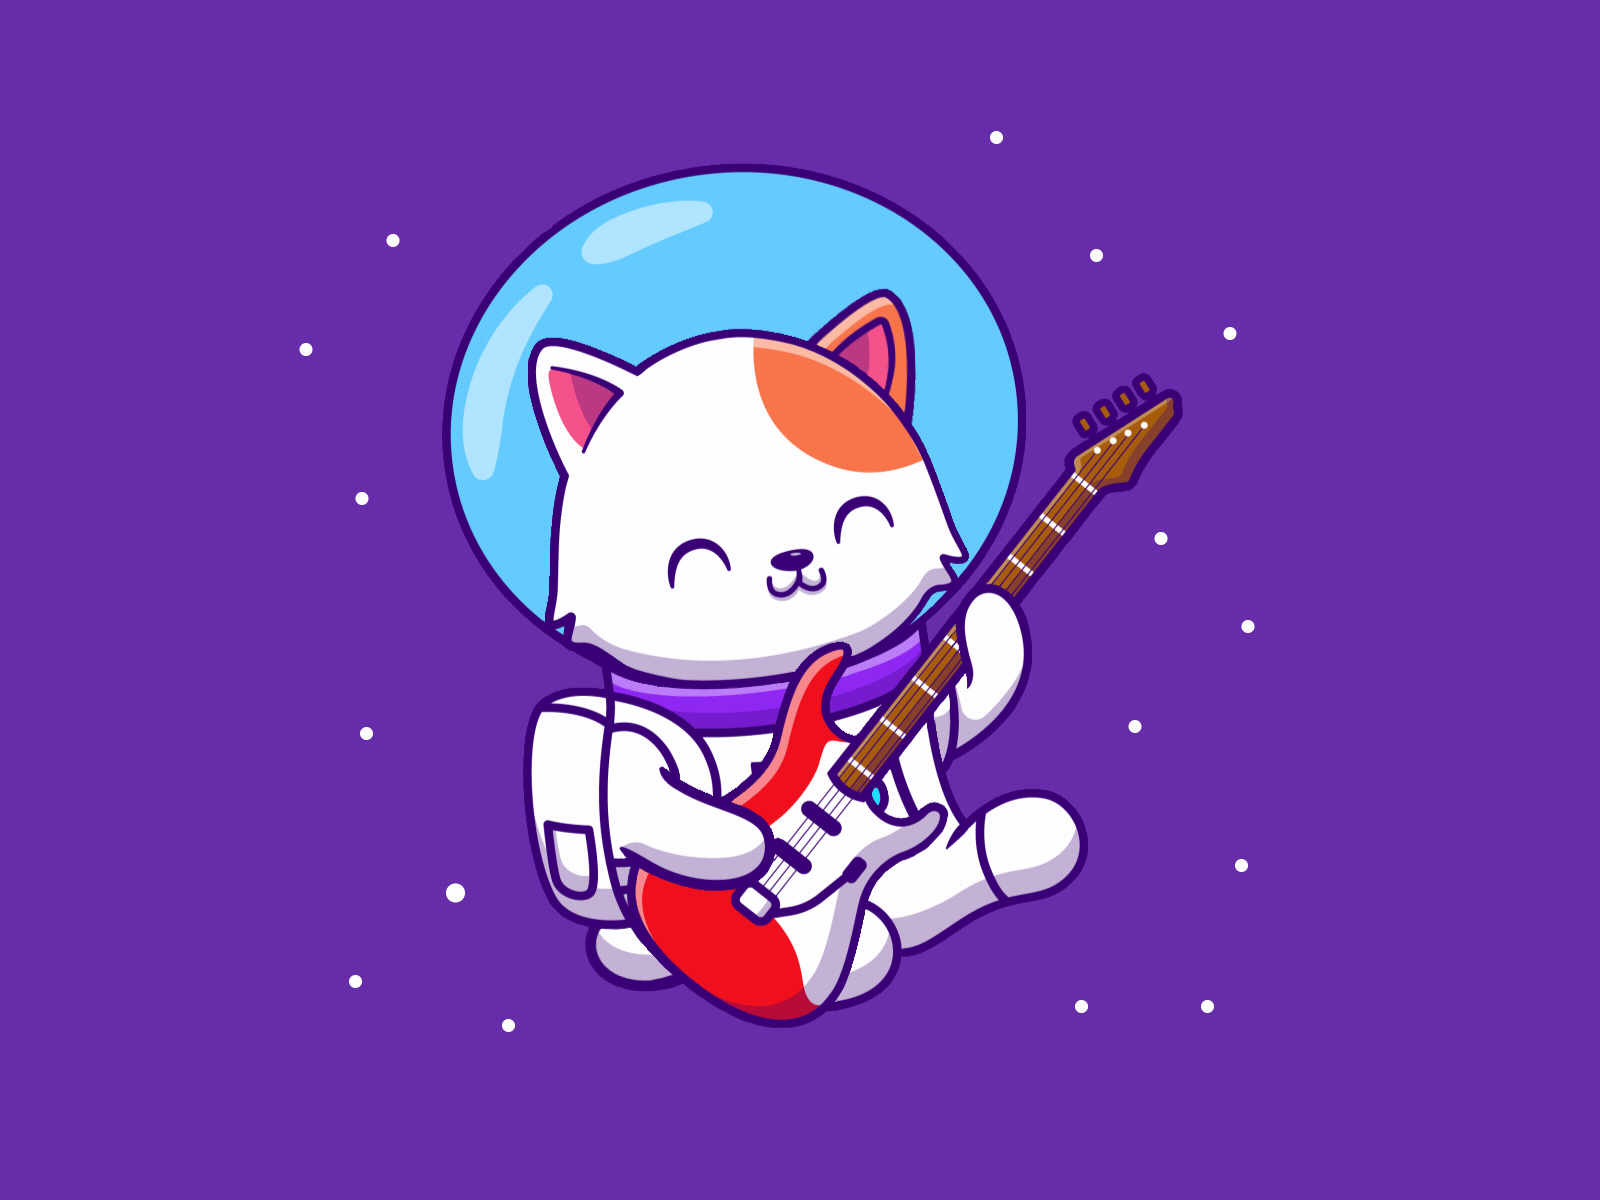 Astro Cat Animation 2d ae after effects animal astronaut cat character animation flatdesign guitar helmet illustration mascot motion design motion graphics music space spaceman stars universe vector